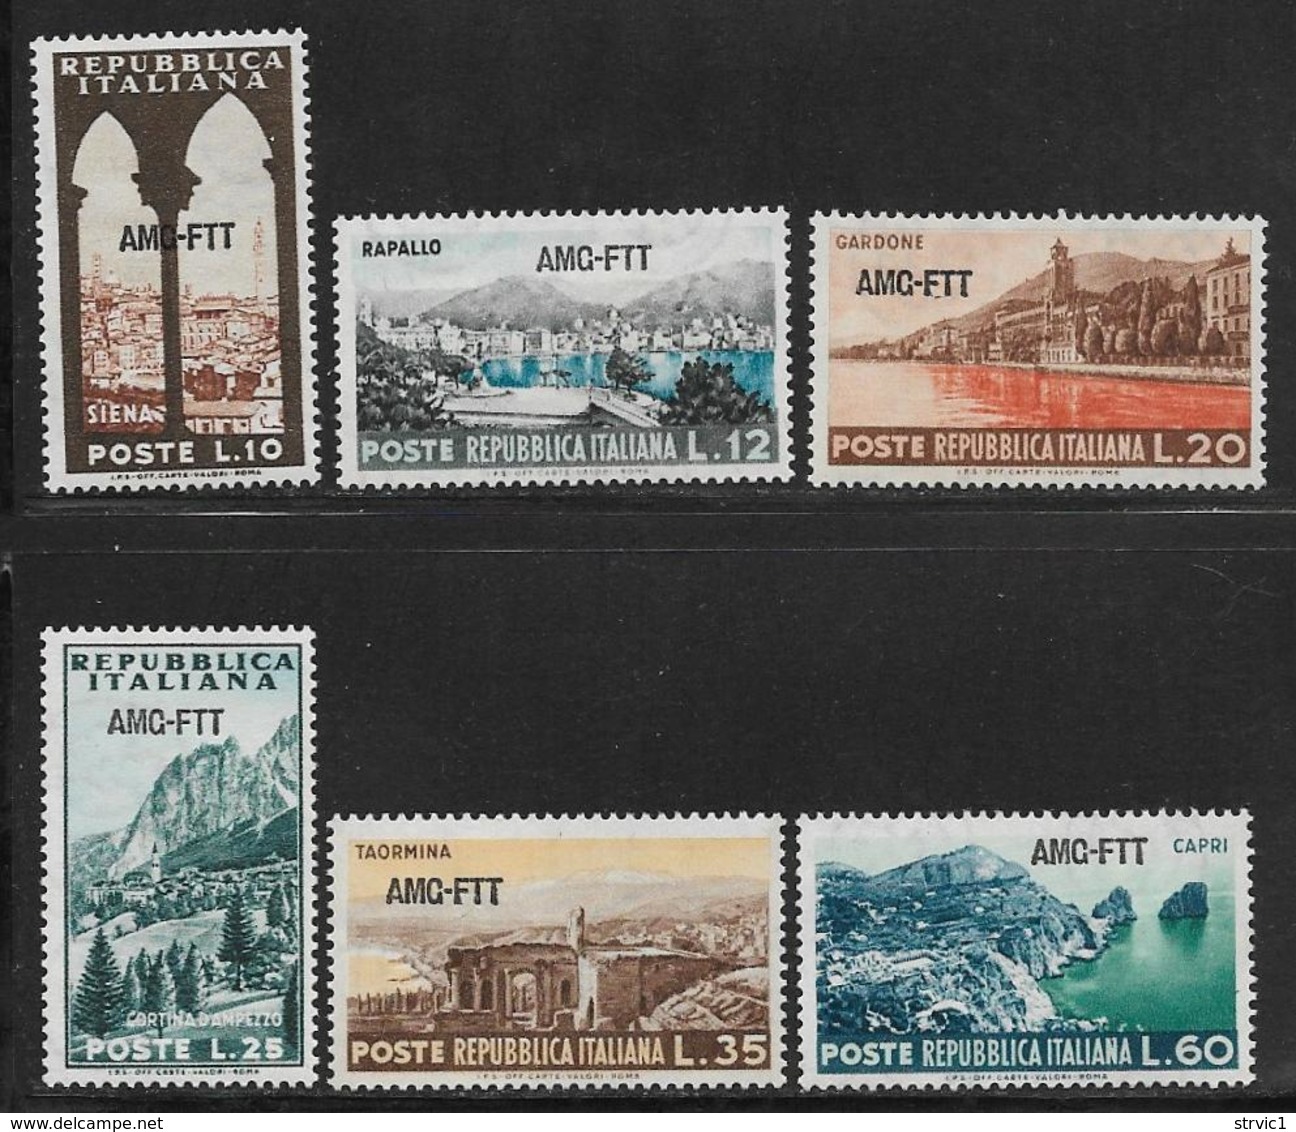 Trieste Zone A, Scott # 188-93 MNH Italy # 641-6 Overprinted, 1954 - Mint/hinged